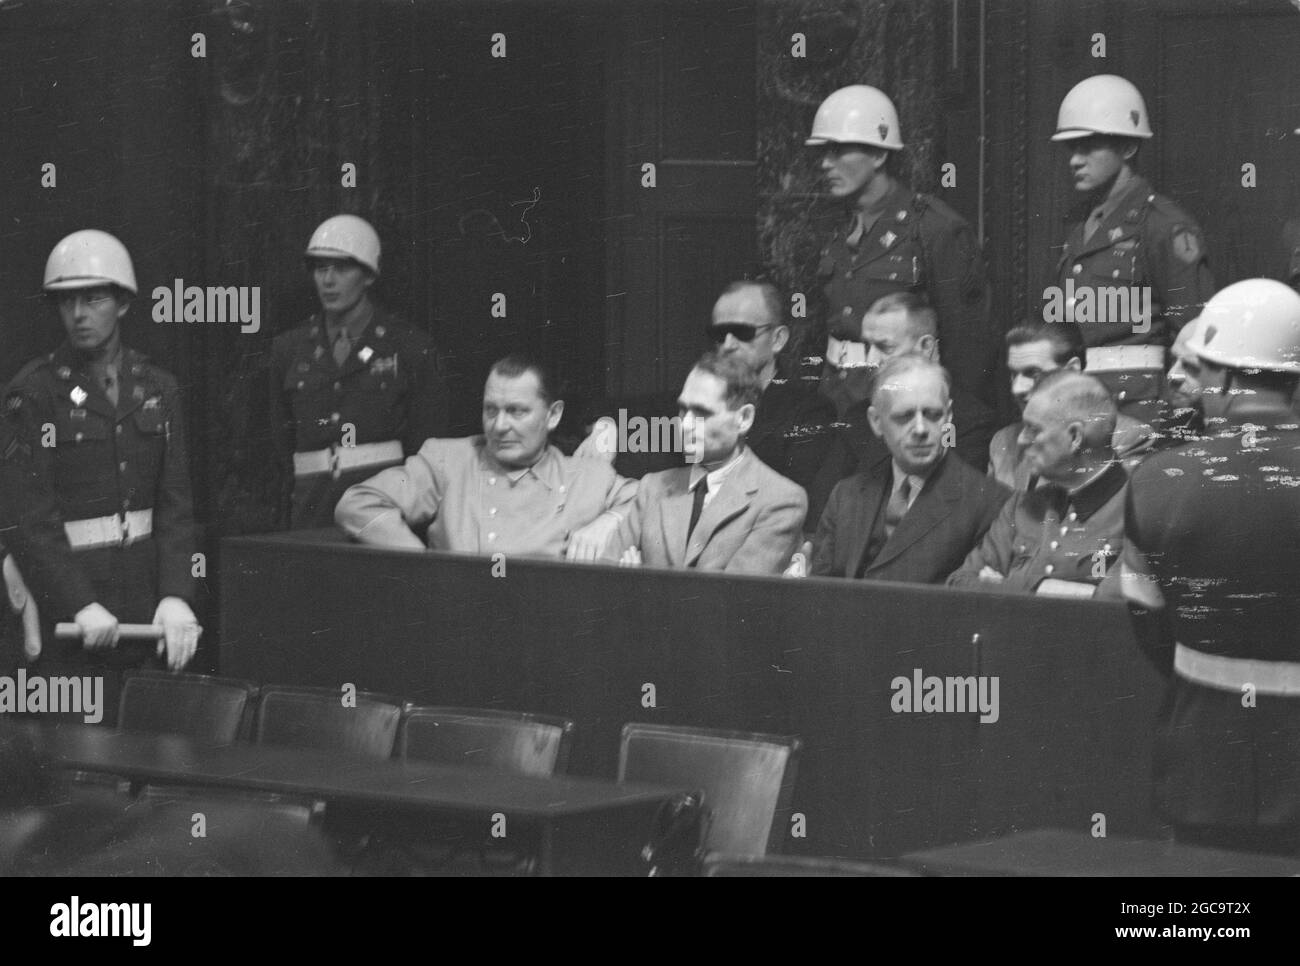 Nazi leaders at the Nuremberg trial. Foreground (L-R) Göring, Hess, Ribbentrop and Keitel, back row Dönitz, Räder and Schirach Stock Photo